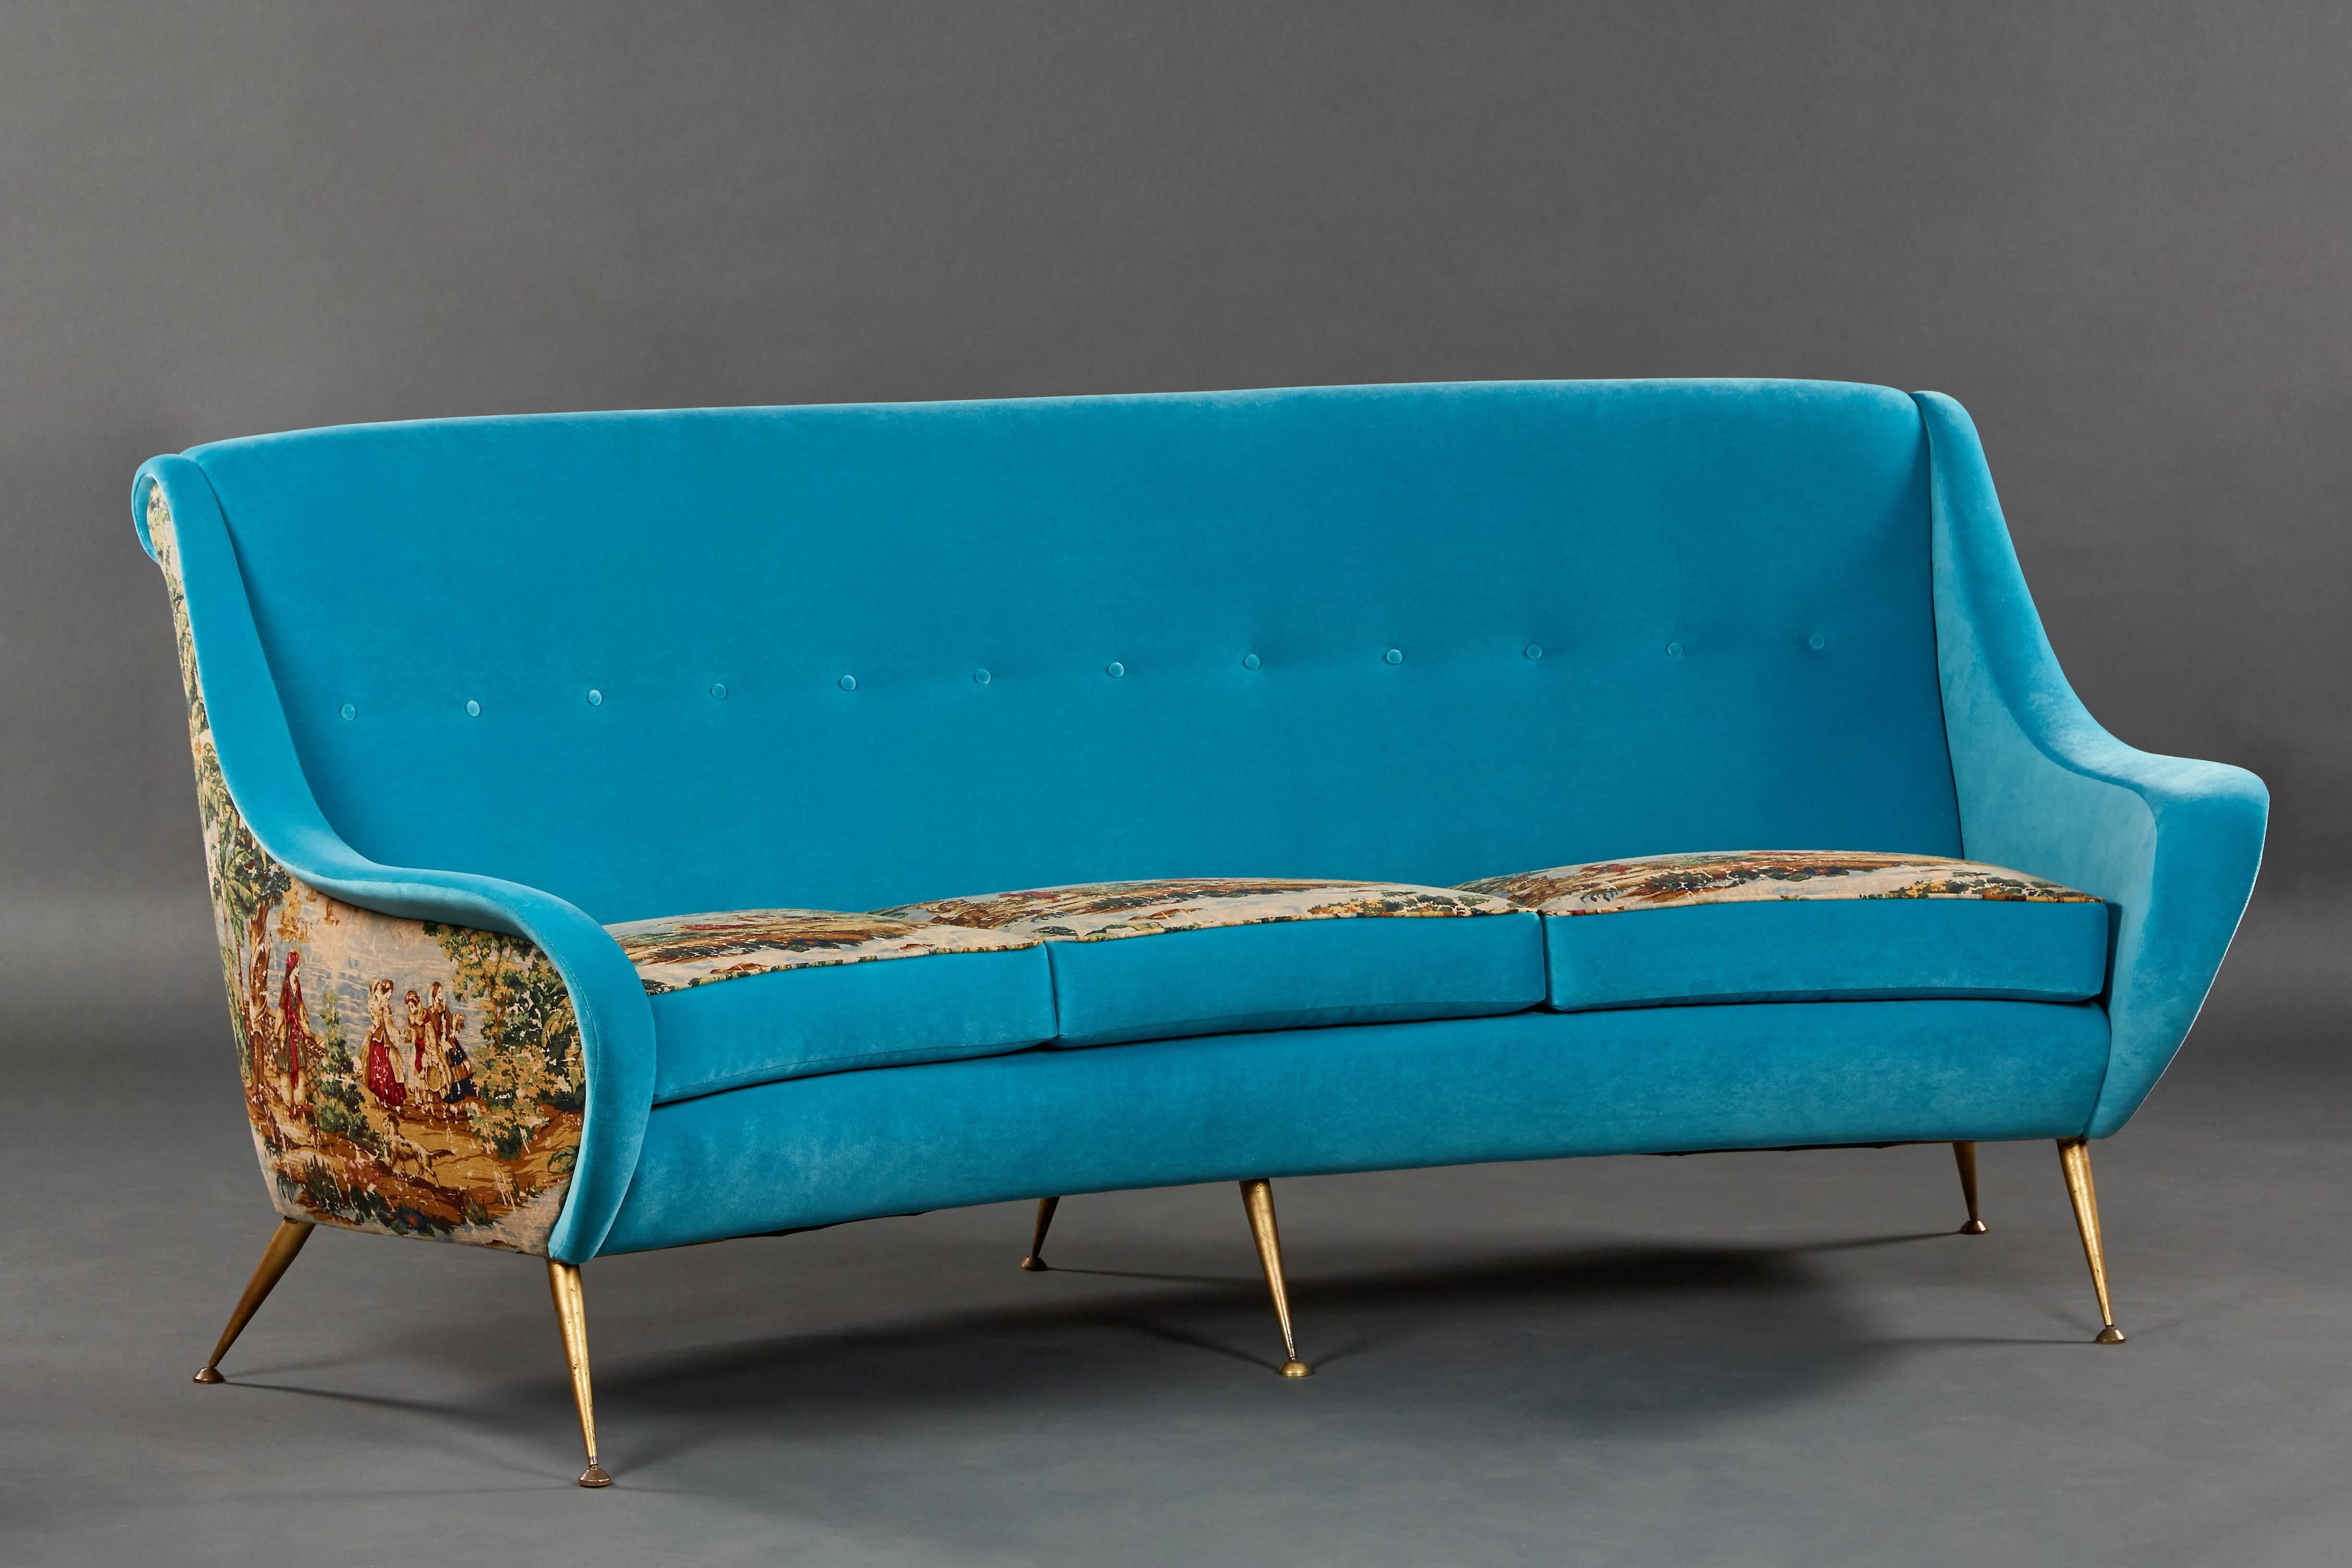 An elegant Italian suite of a sofa and two armchairs newly upholstered in turquoise velvet and toile. 

Sofa dimensions: 36” H x 75” W x 31” D
Chair dimensions: 35” H x 32” W x 31” D.